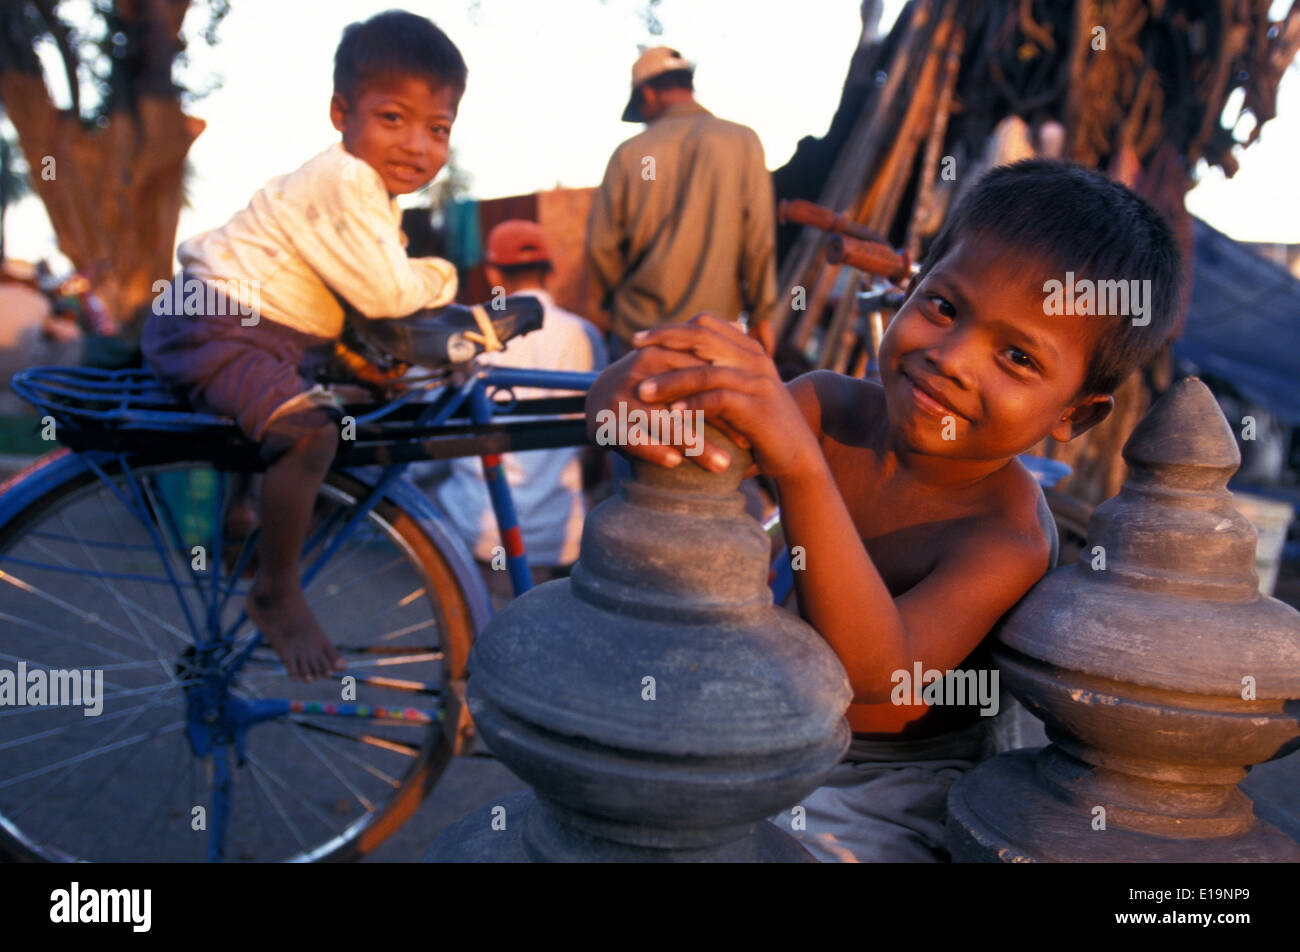 Cambodia children playing with toys,- two girls aged 8-10 years, Phnom  Penh, Cambodia, Asia Stock Photo - Alamy